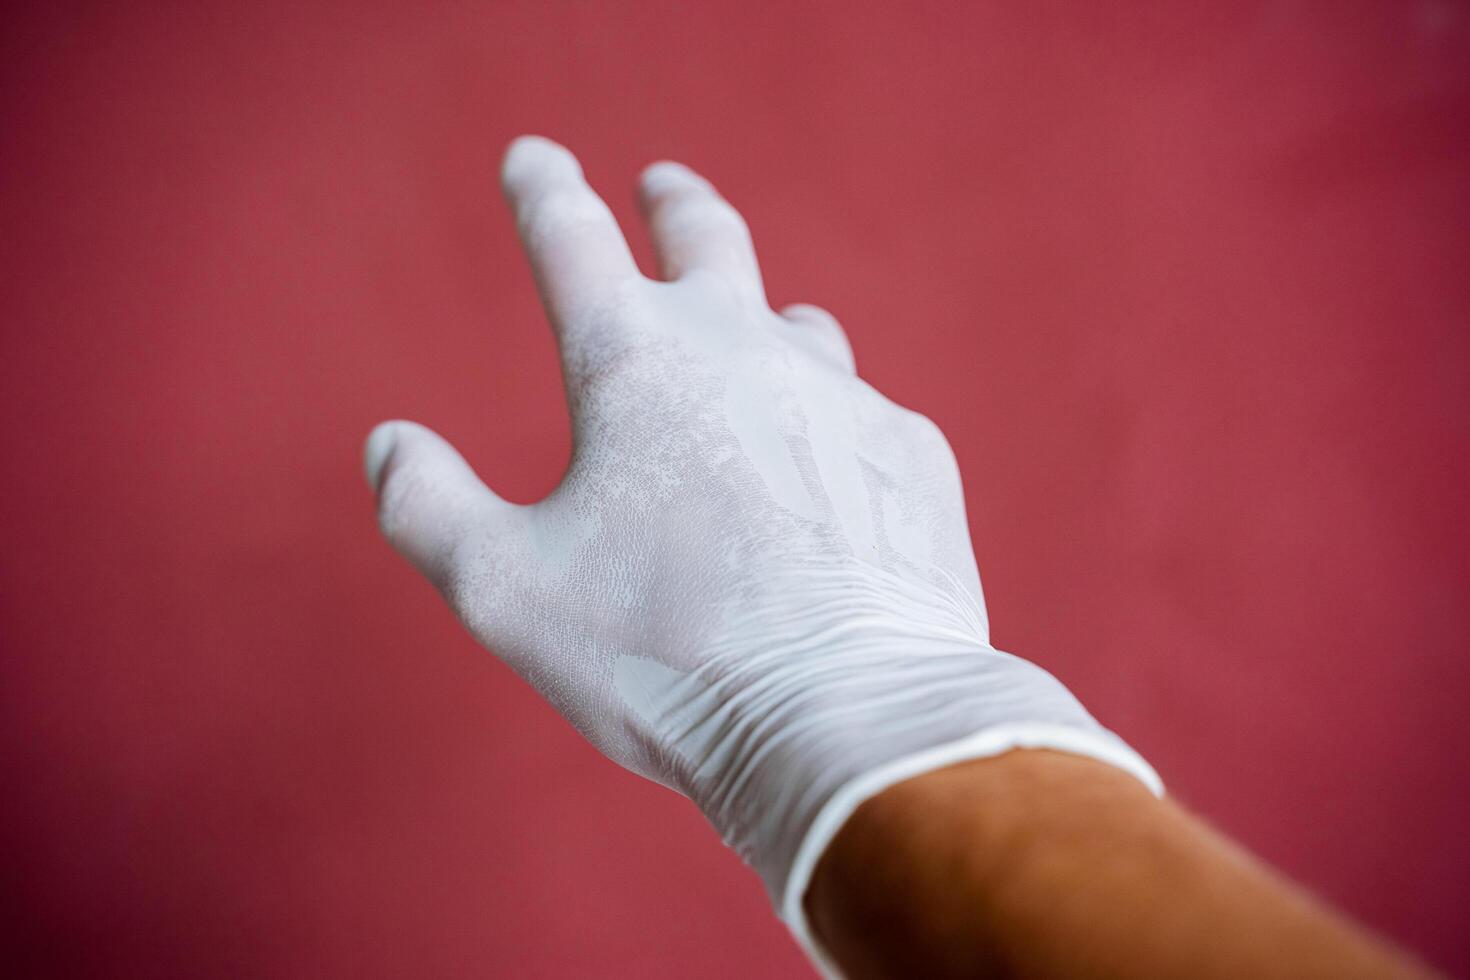 a hand in a white medical glove stretches forward, a sweaty hand under latex, fingers spread out against a maroon wall, hand protection photo